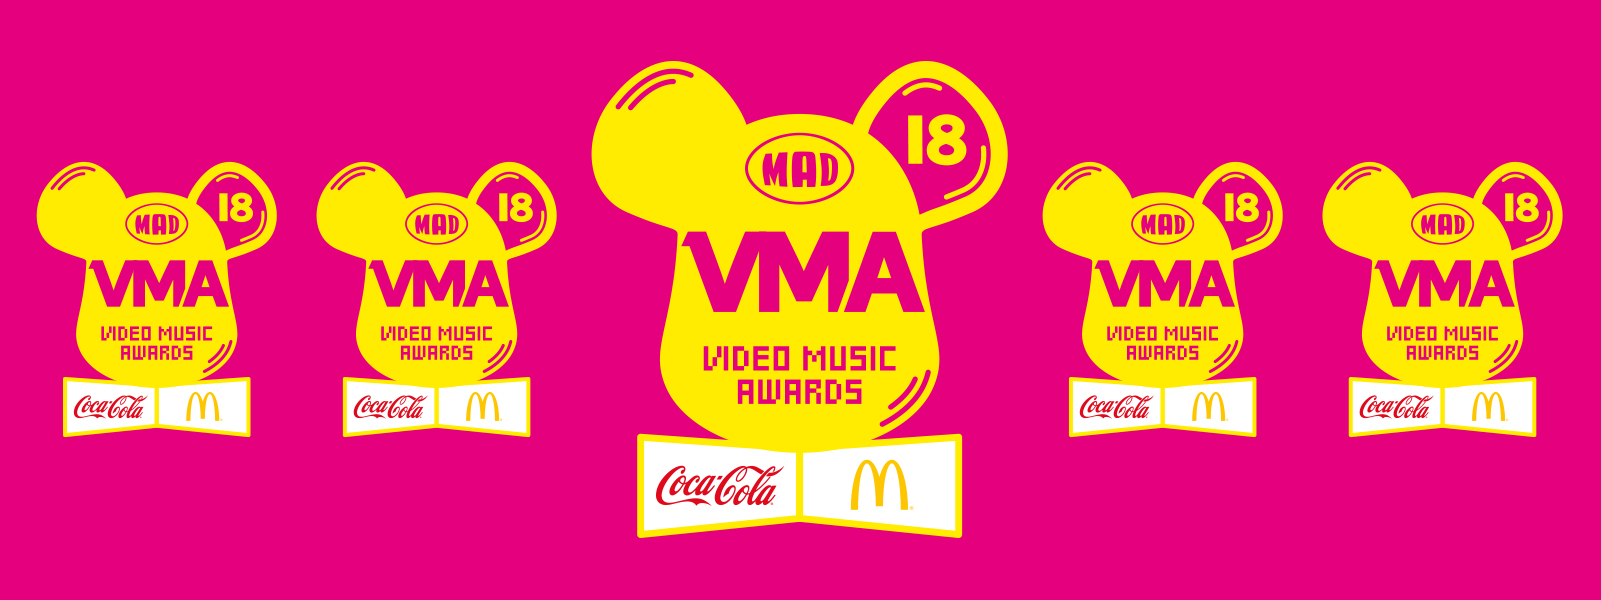 Brand Identity for MAD Video Music Awards